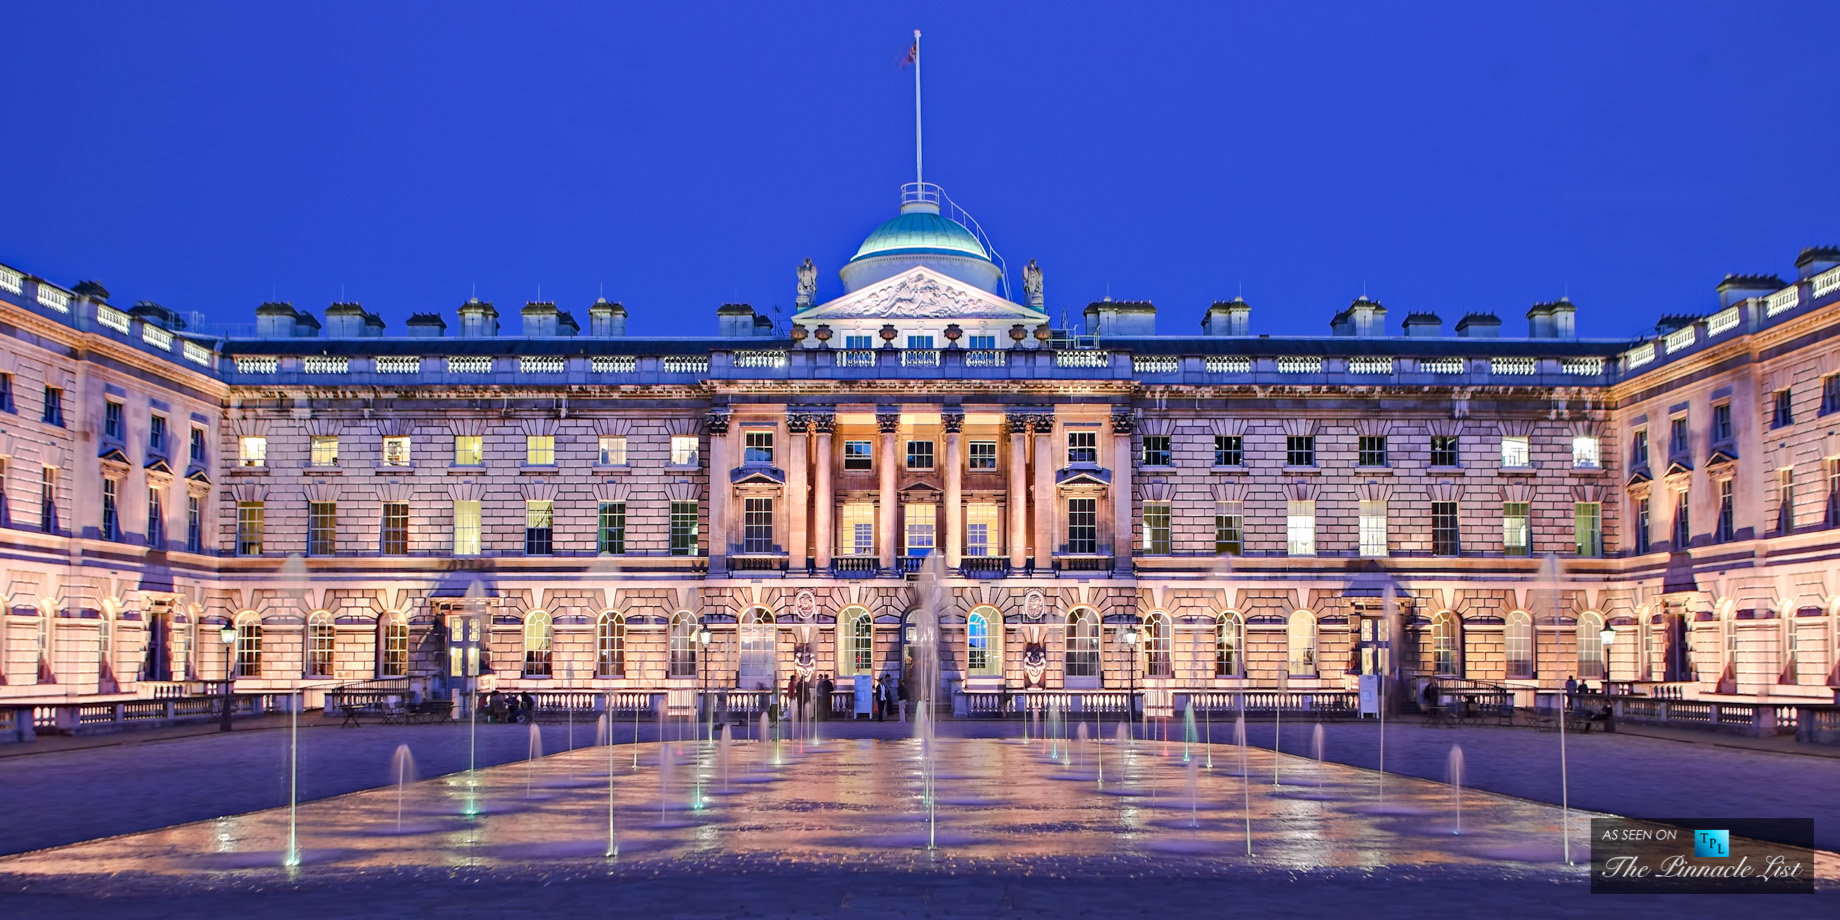 The Story Behind the Walls - Somerset House at the Strand in London